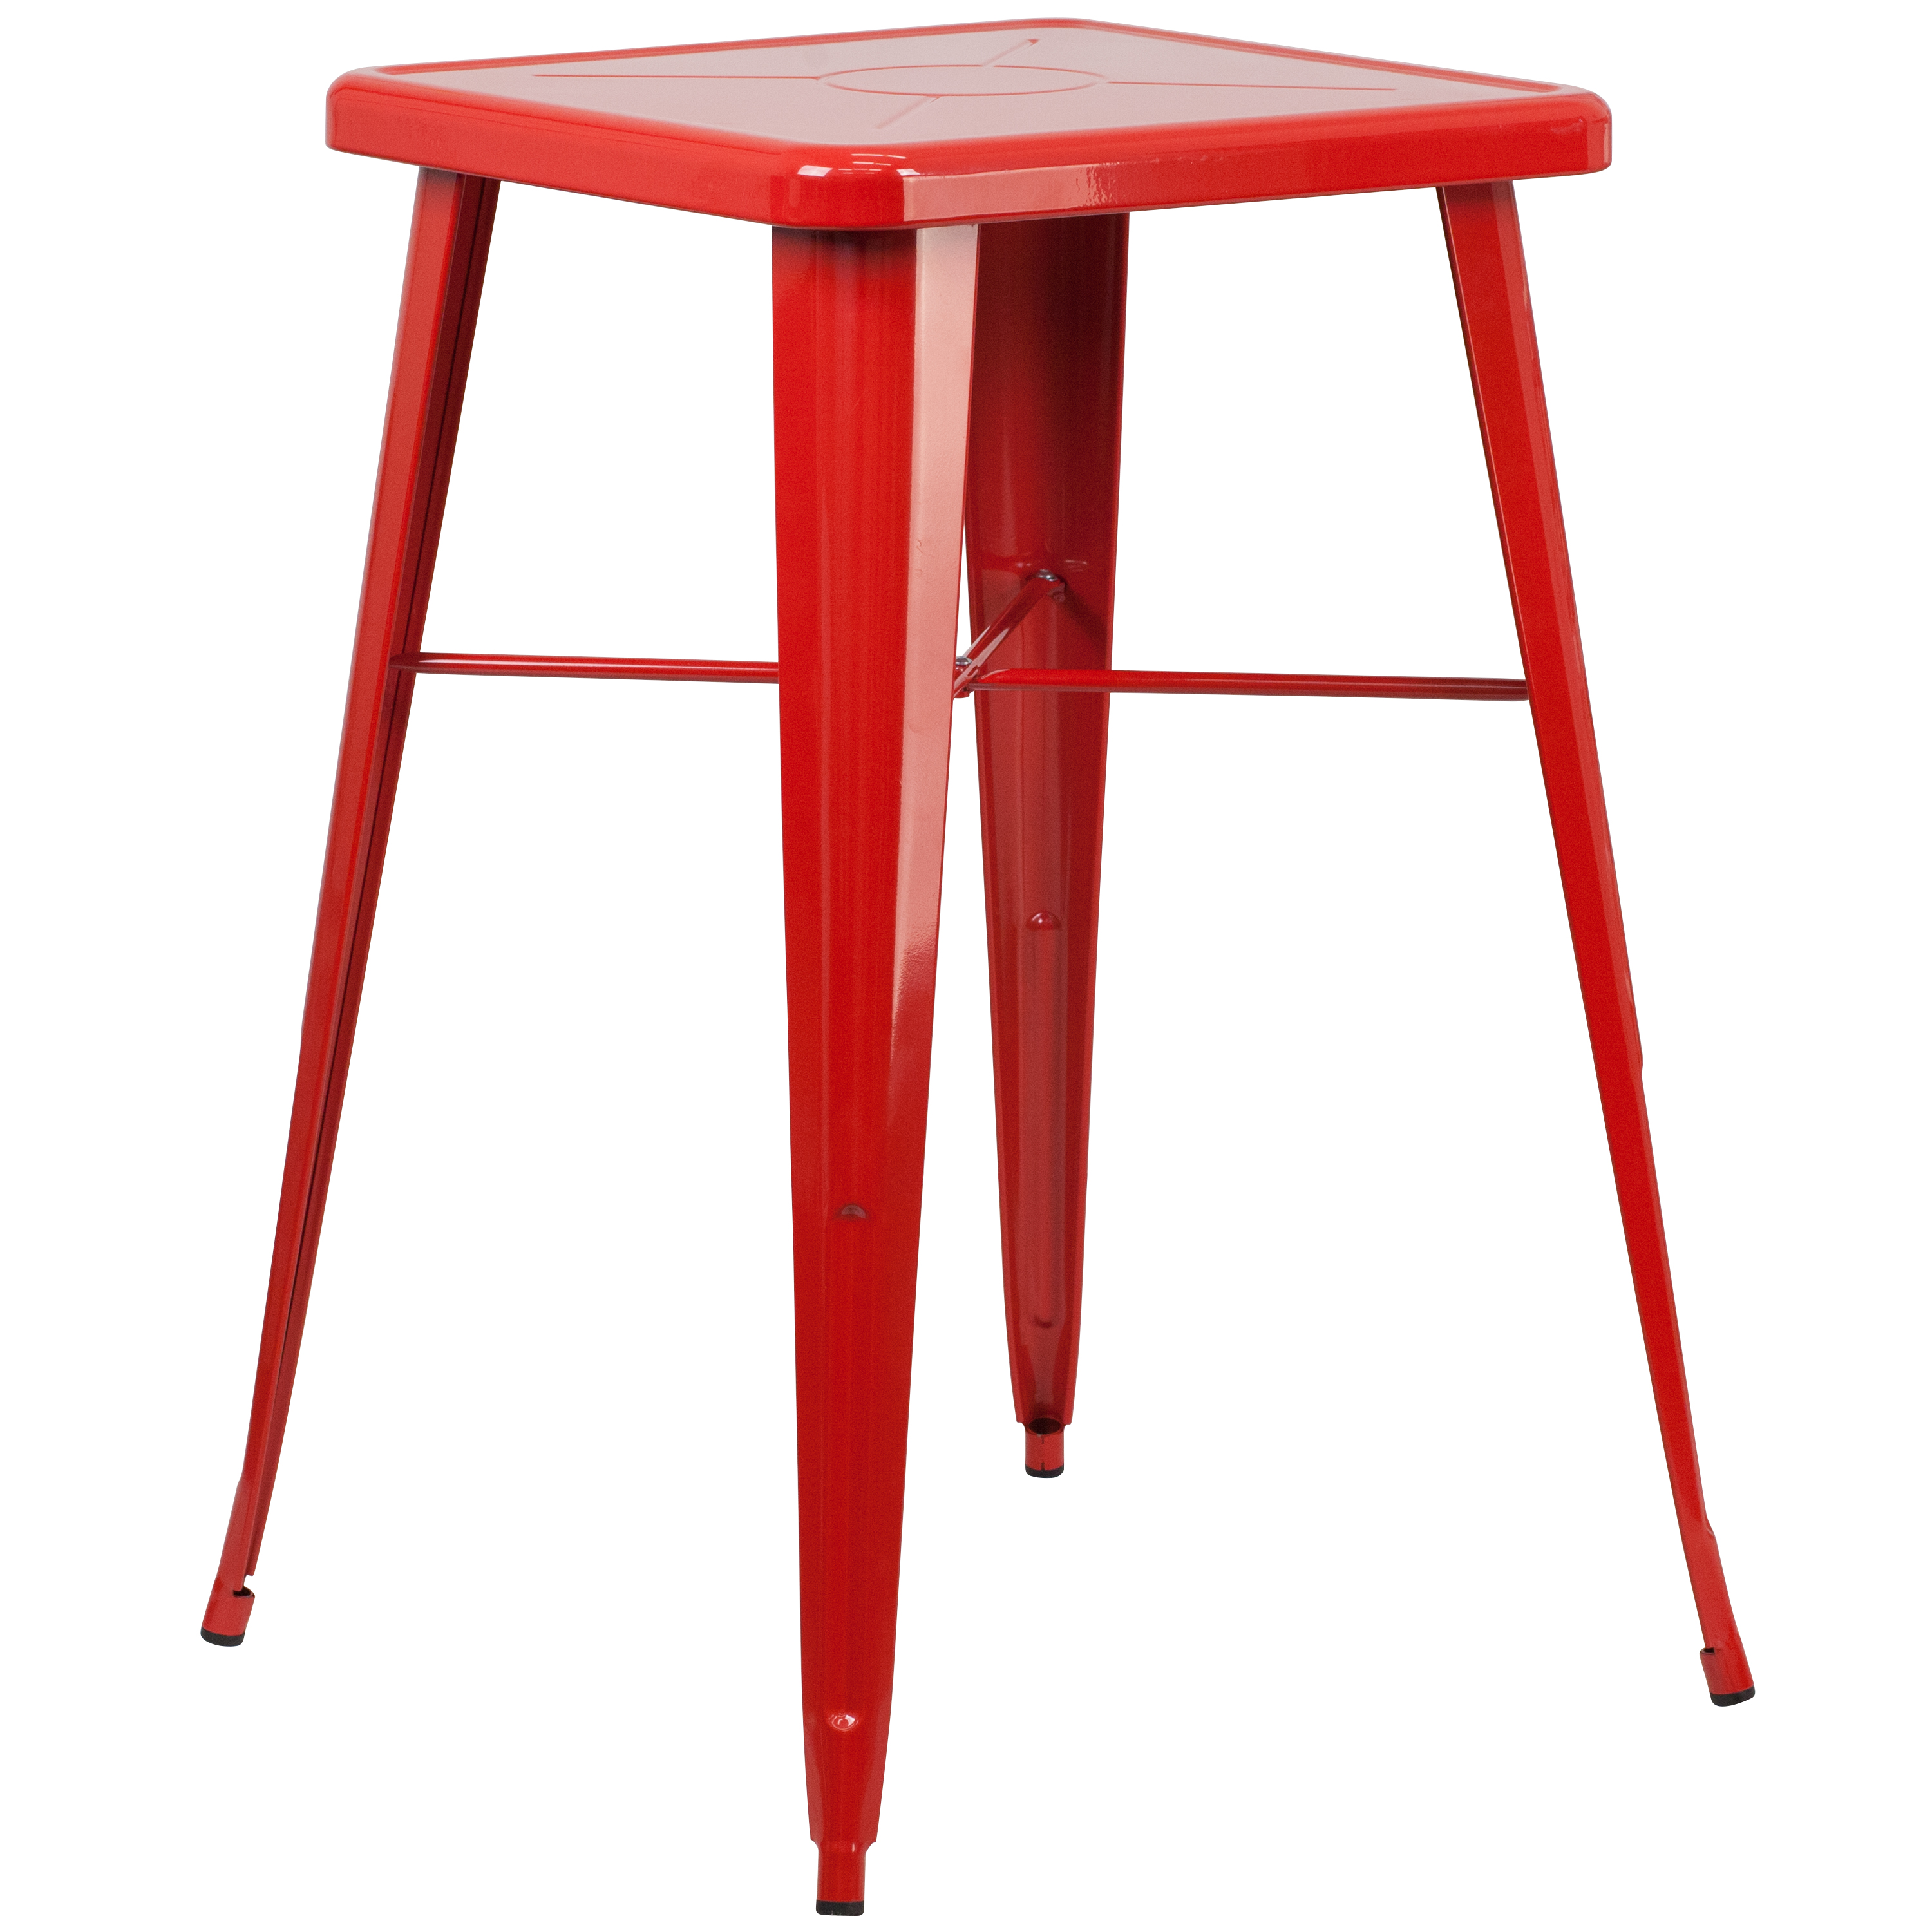 Flash Furniture Commercial Grade 23.75" Square Red Metal Indoor-Outdoor Bar Table Set with 2 Square Seat Backless Stools - image 4 of 5